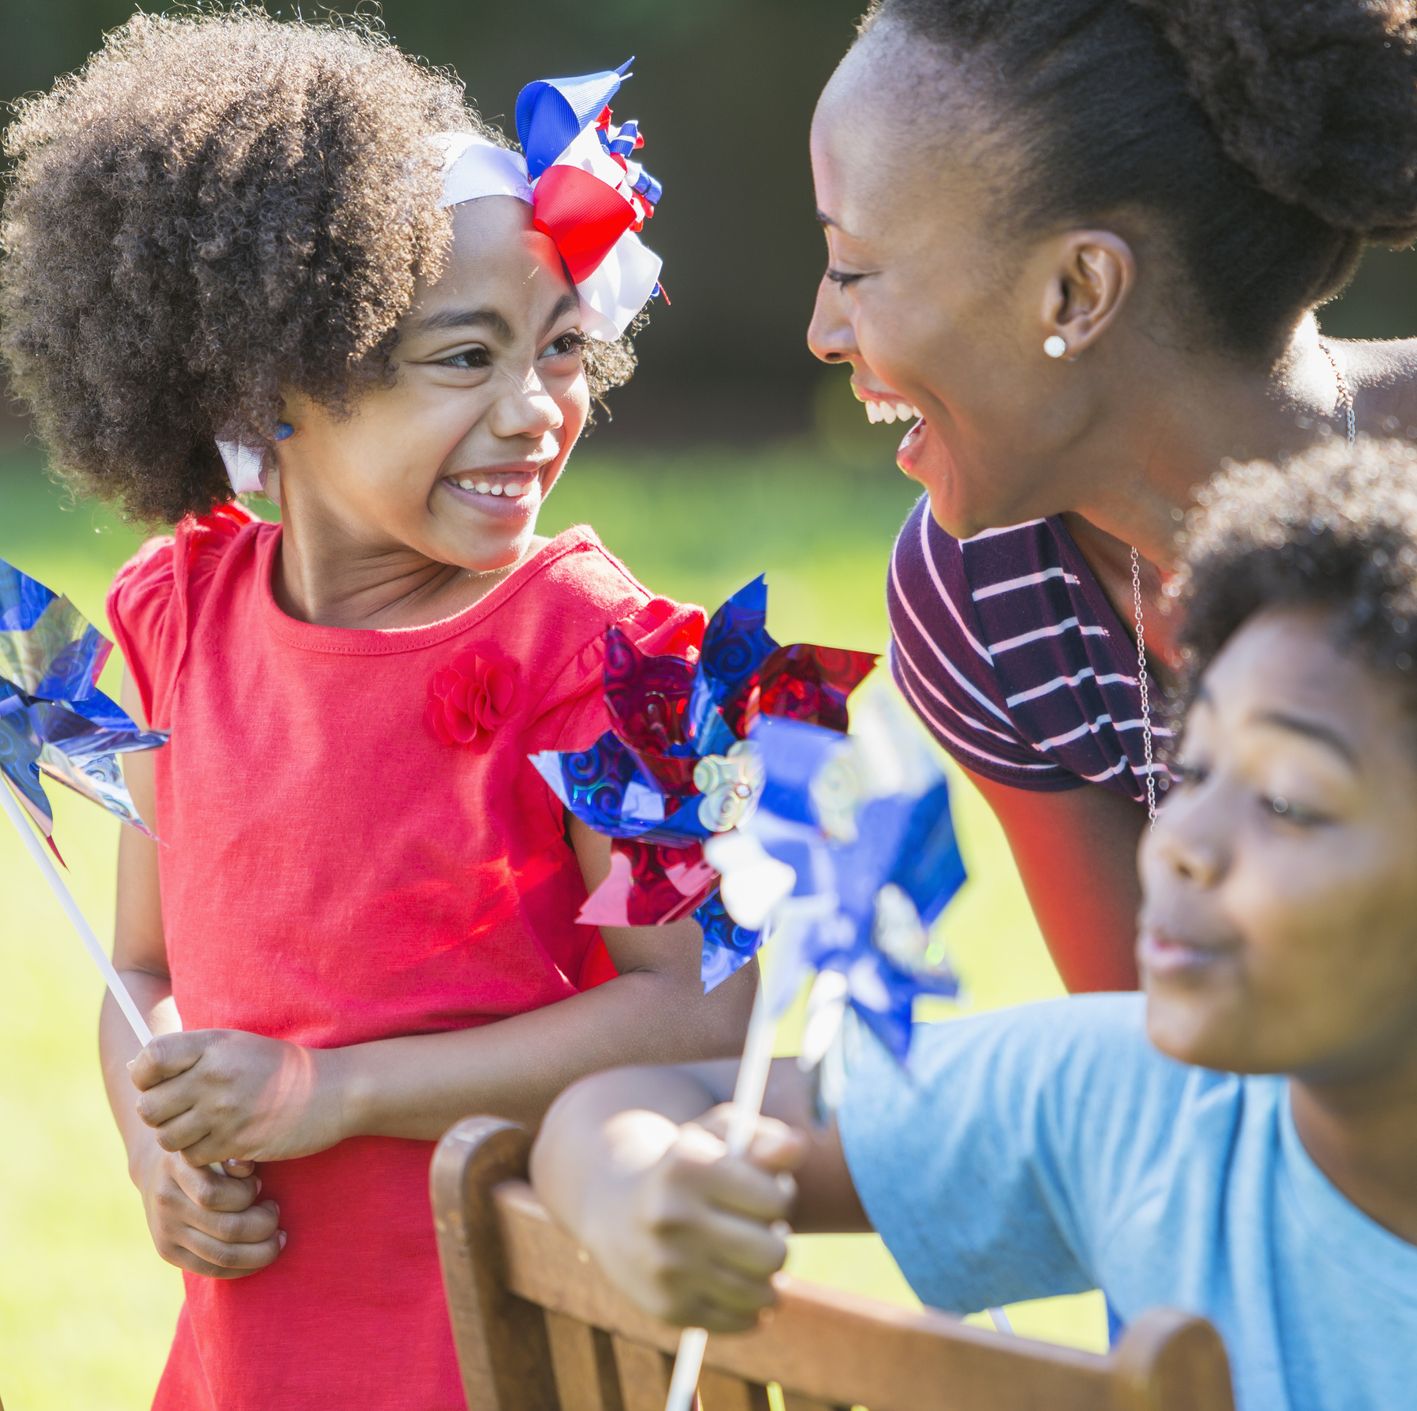 24 Memorial Day Activities to Remind the Family What the Holiday Is Really About